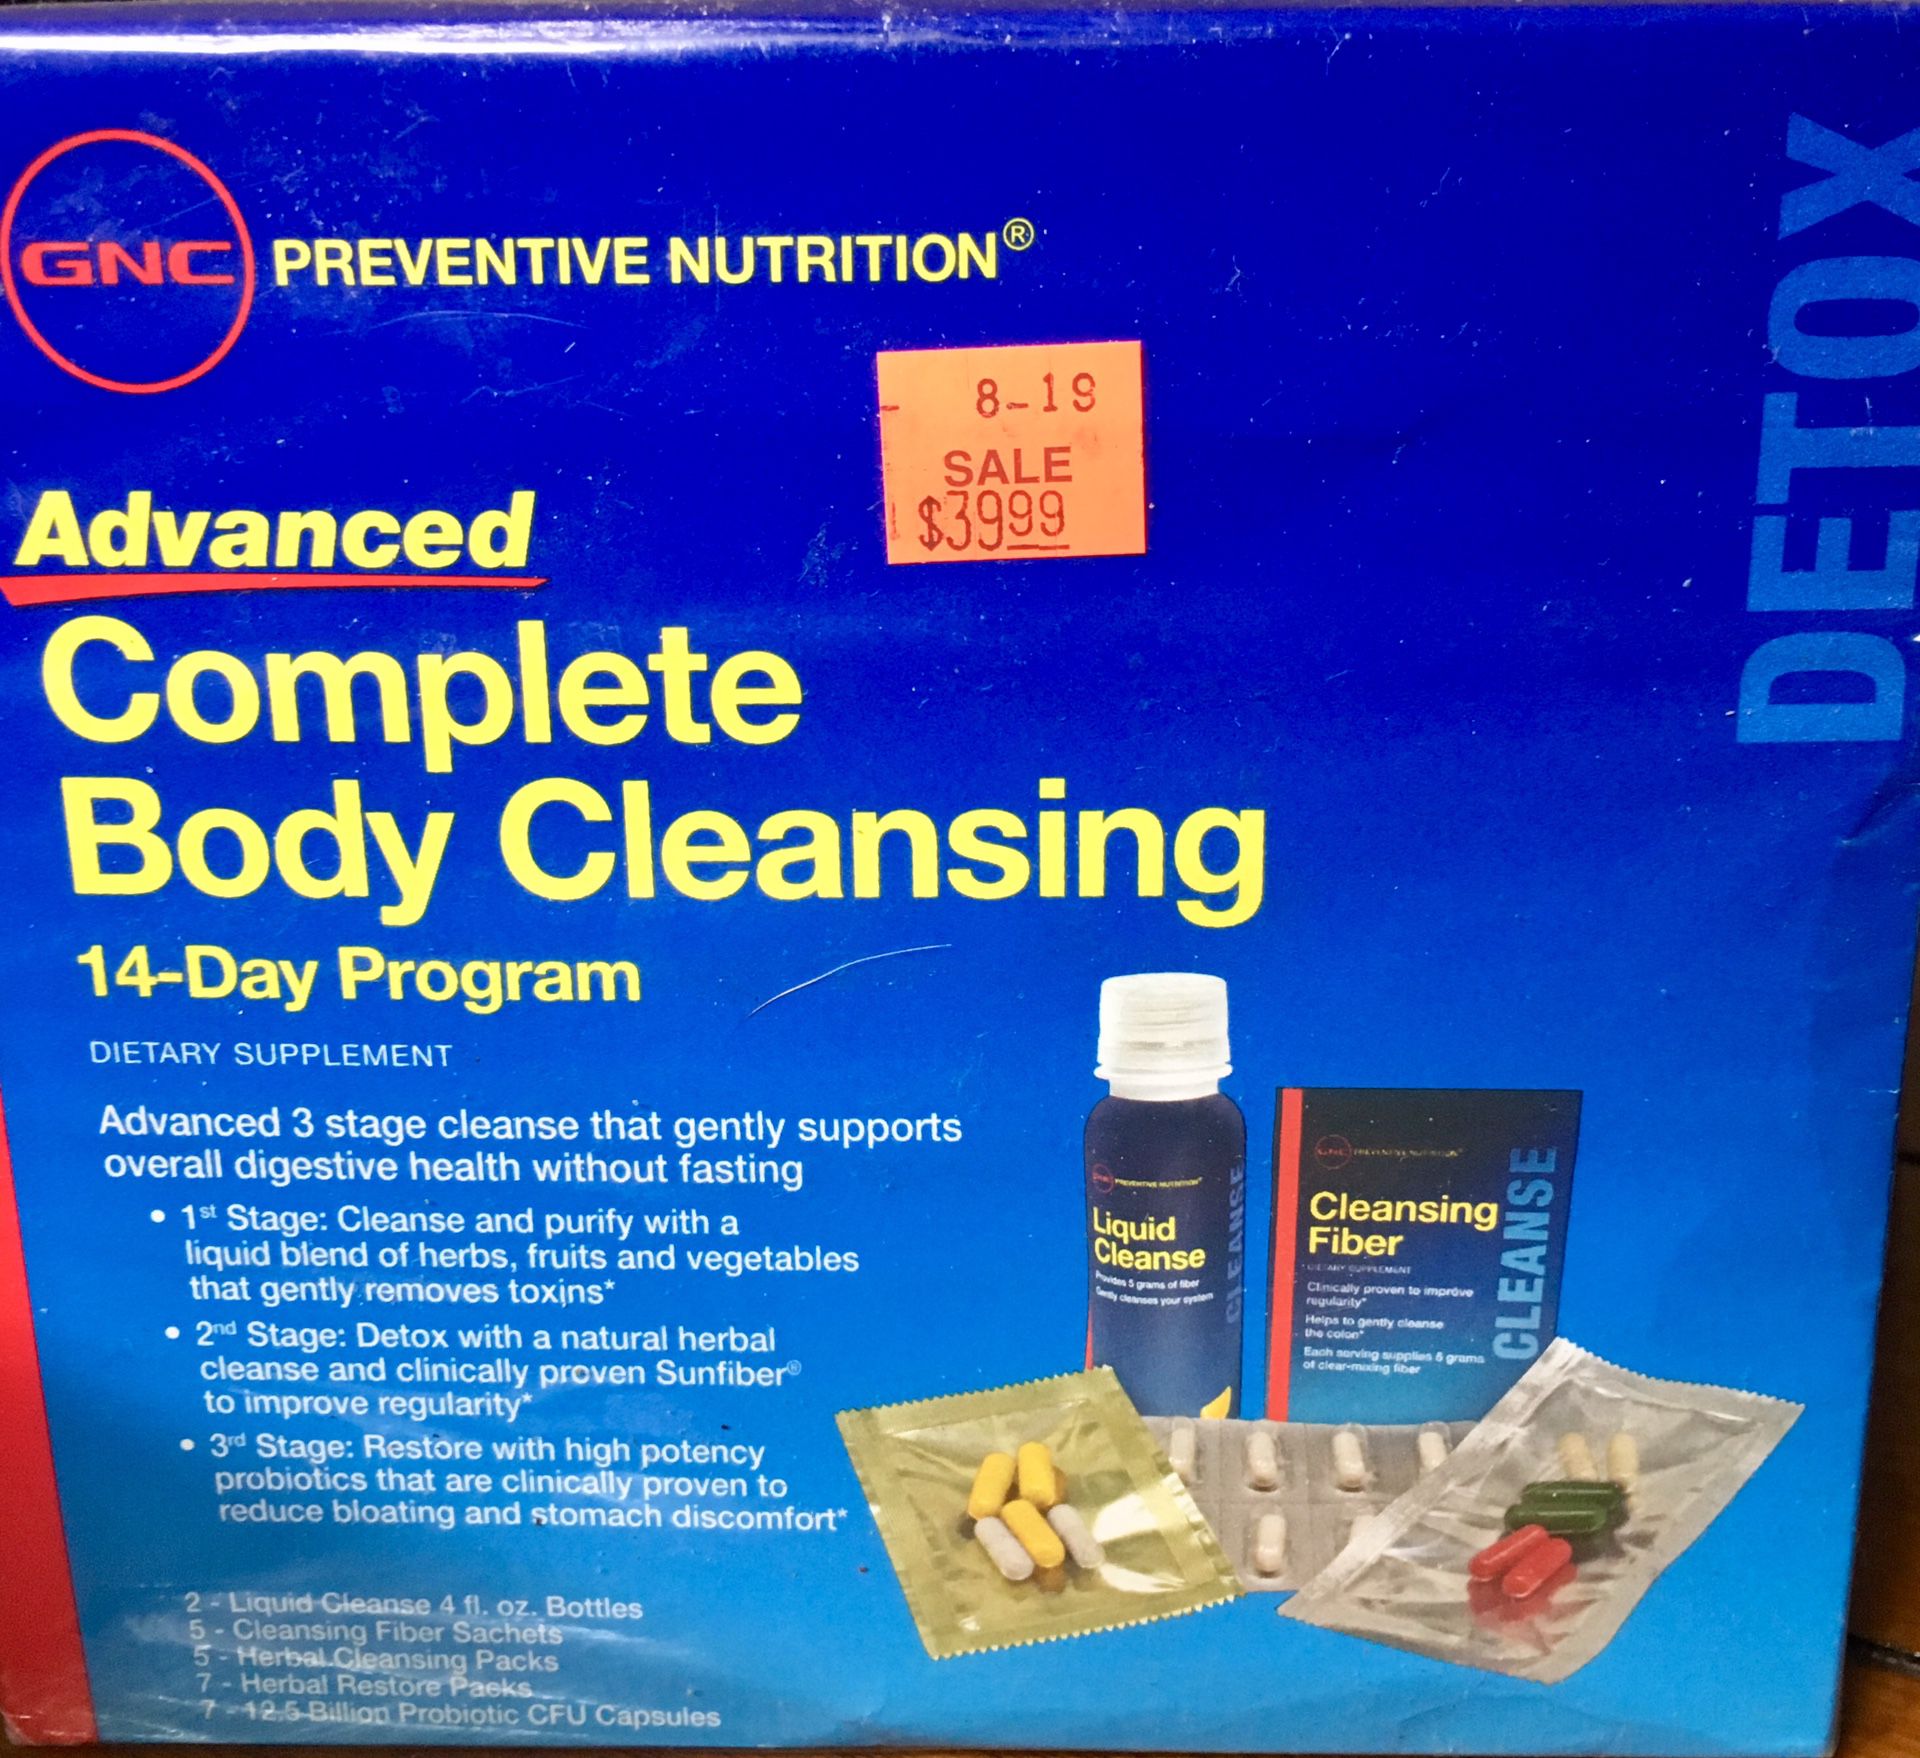 ADVANCED COMPLETE BODY CLEANSING